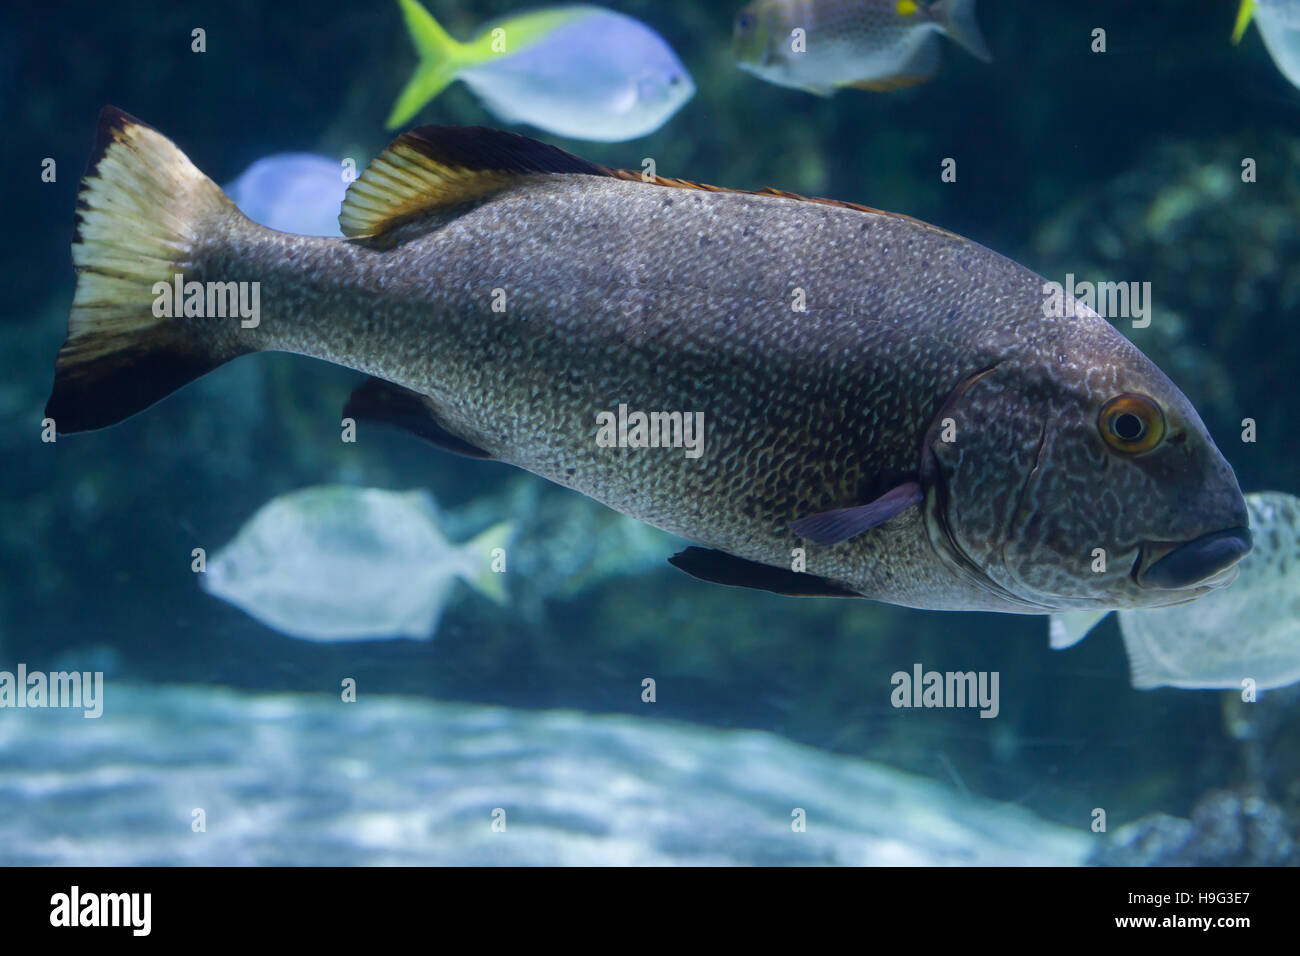 Brown sweetlips (Plectorhinchus gibbosus), also known as the silver grunt. Stock Photo